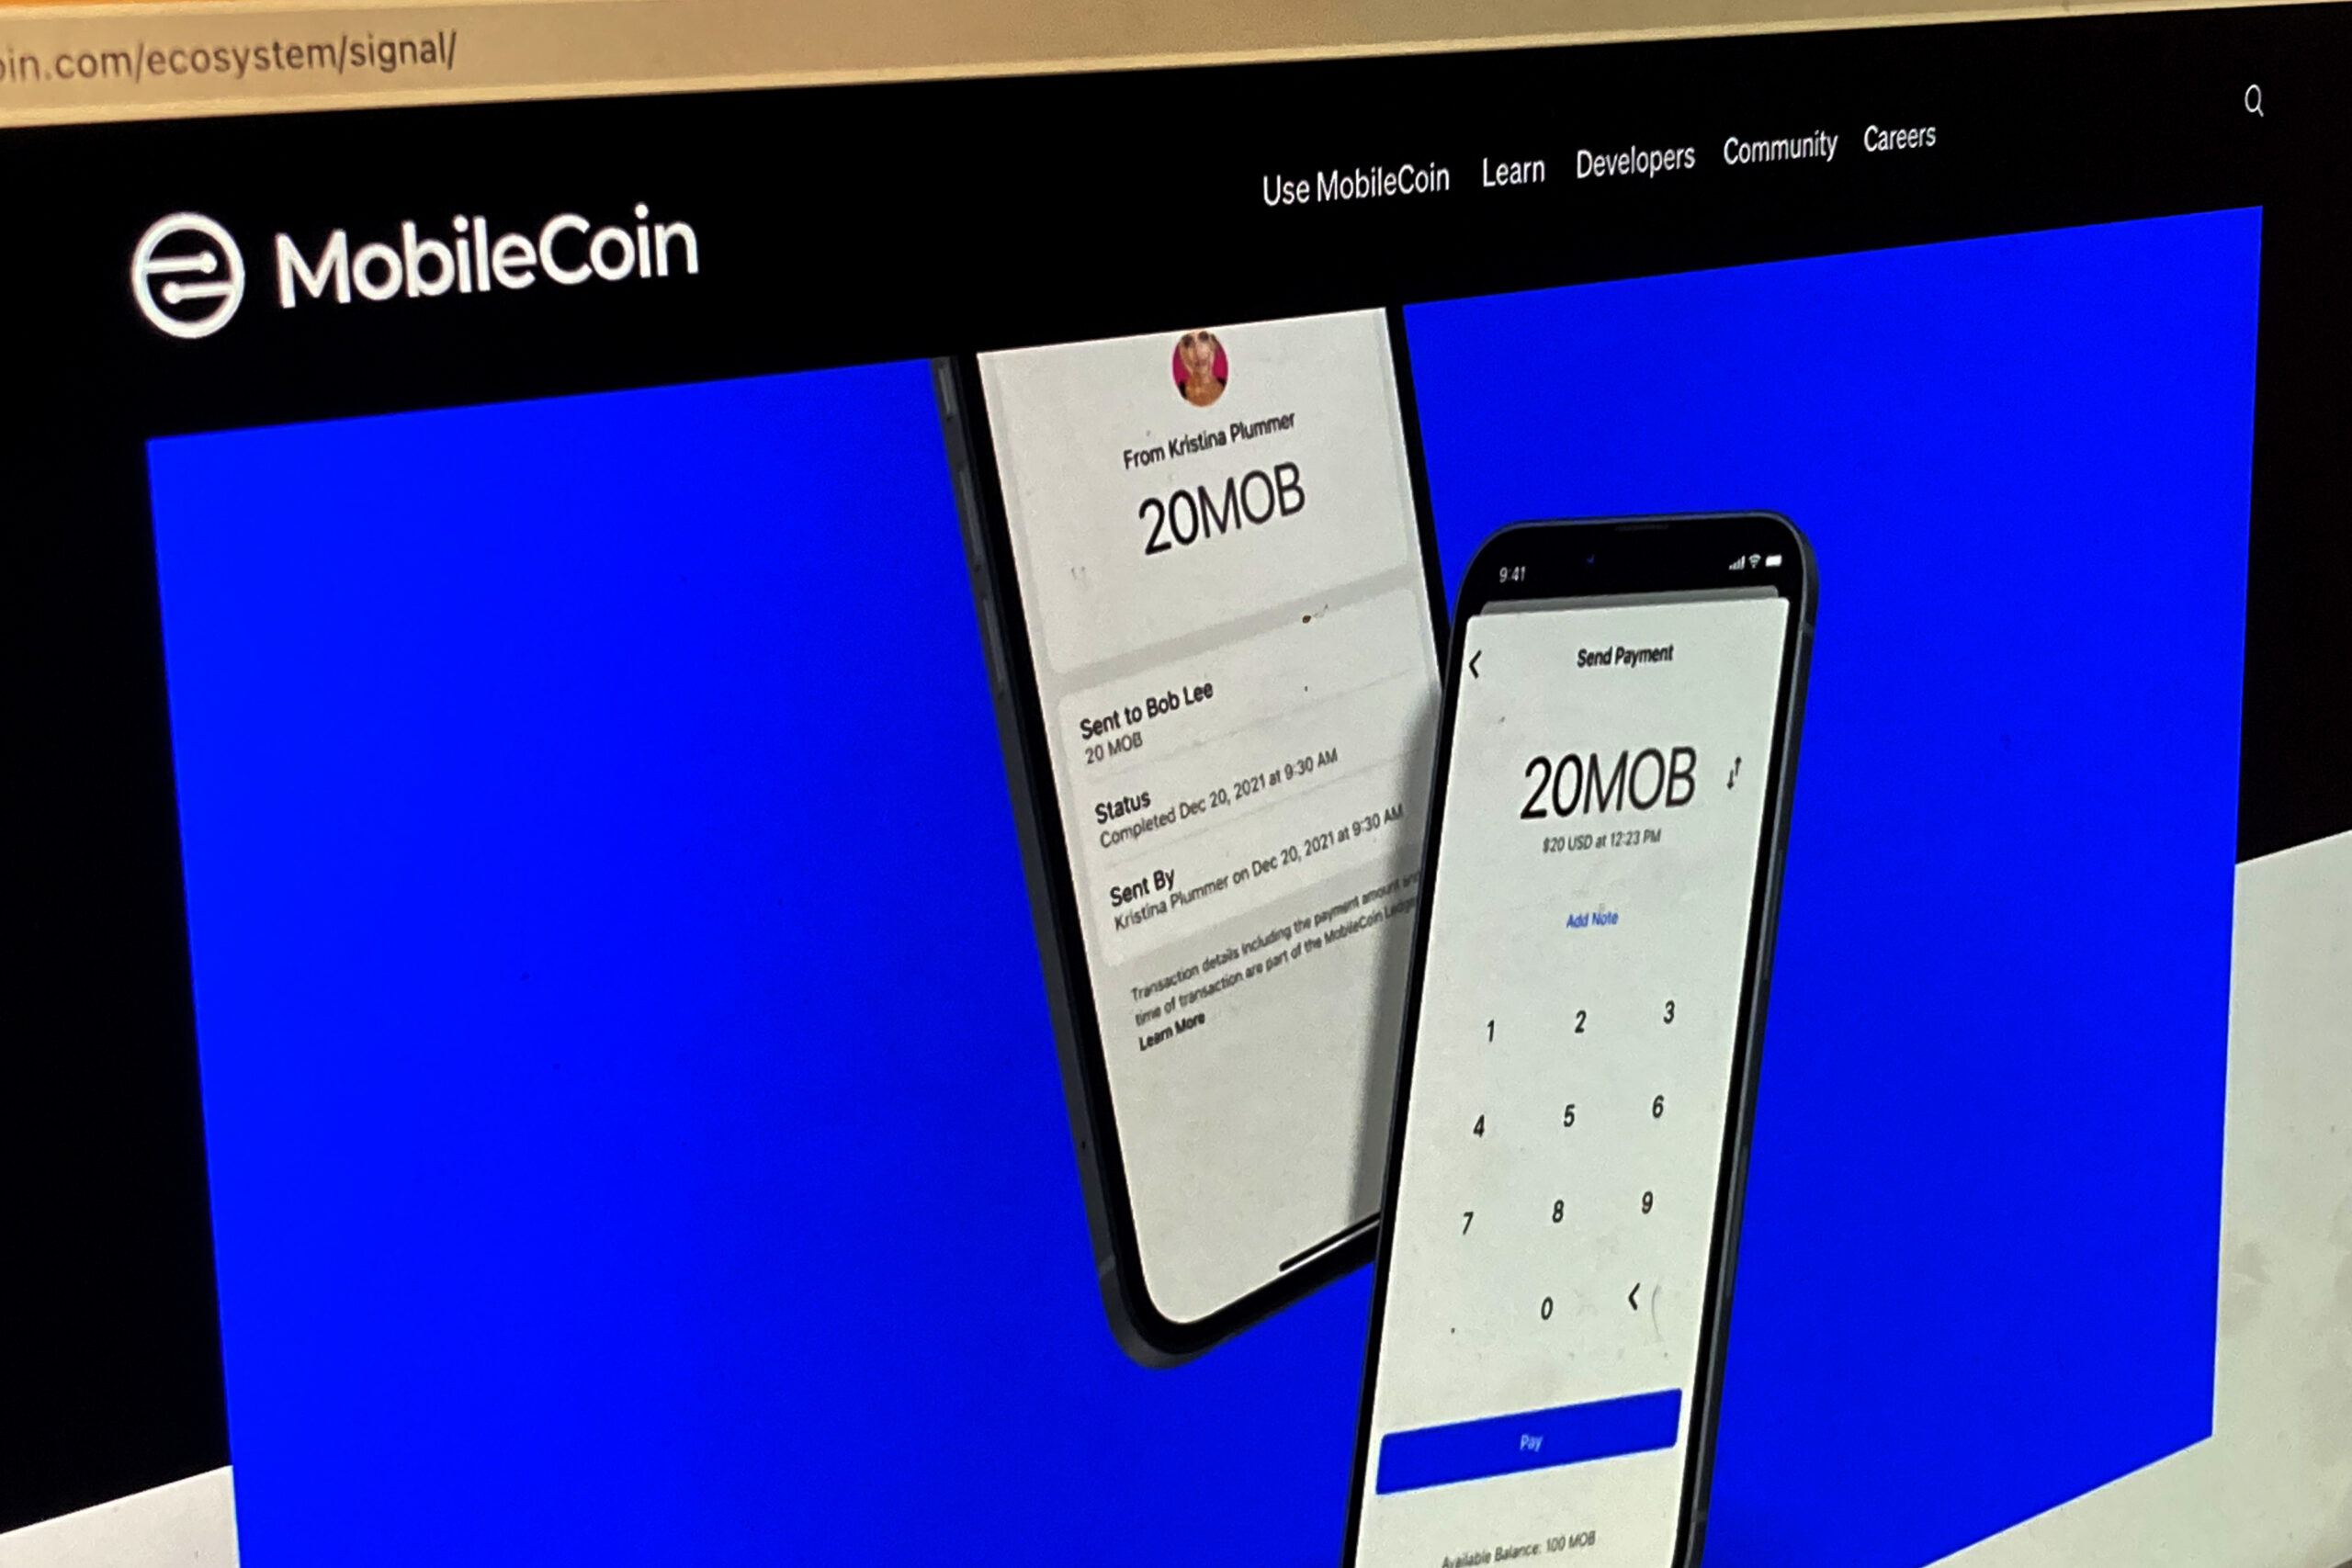 What Is MobileCoin, the Company Where Slain Tech Exec Bob Lee Worked?